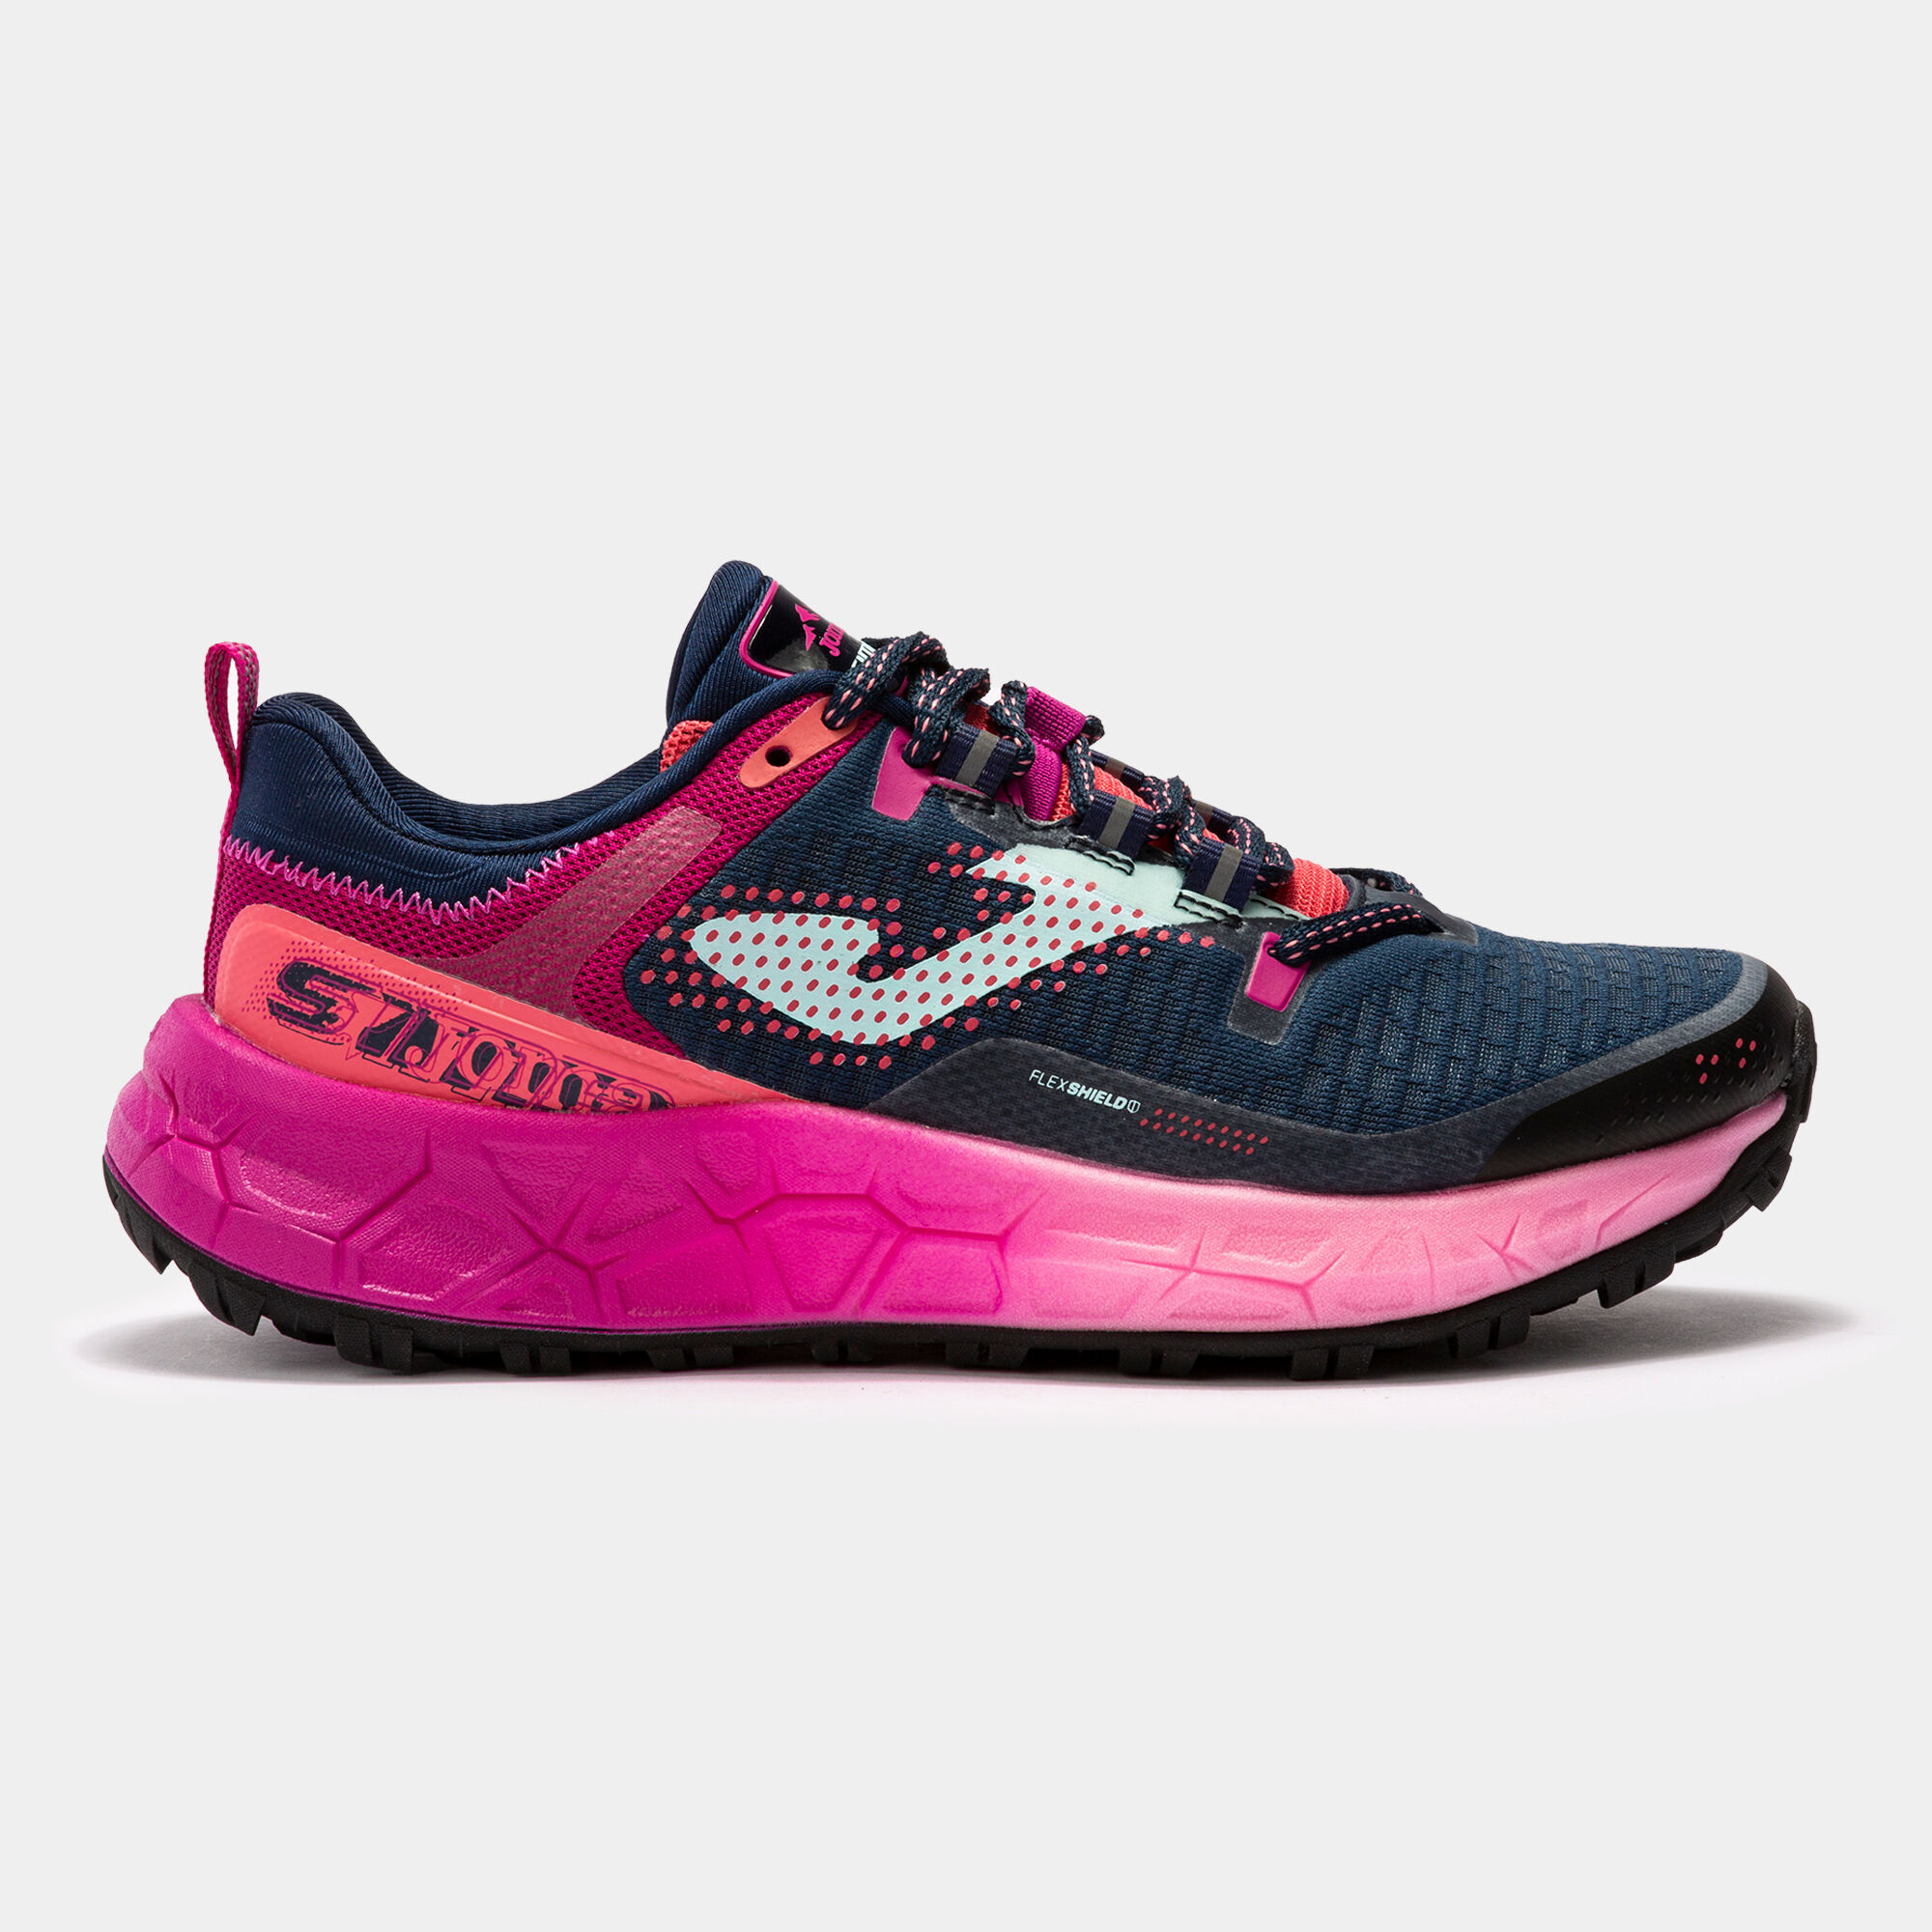 TRAIL-RUNNING SHOES SIMA 22 WOMAN NAVY BLUE PINK